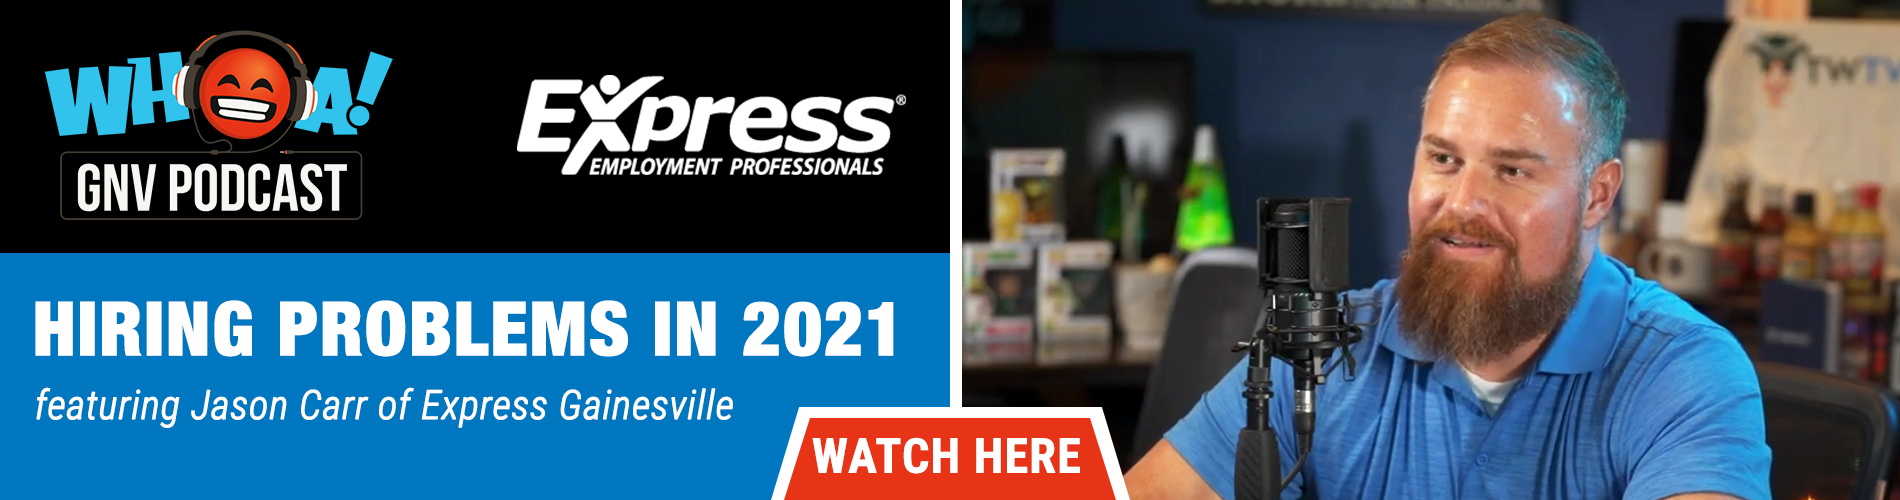 WOAH GNV Podcast - Hiring Problems in 2021, feat. Gainesville Express